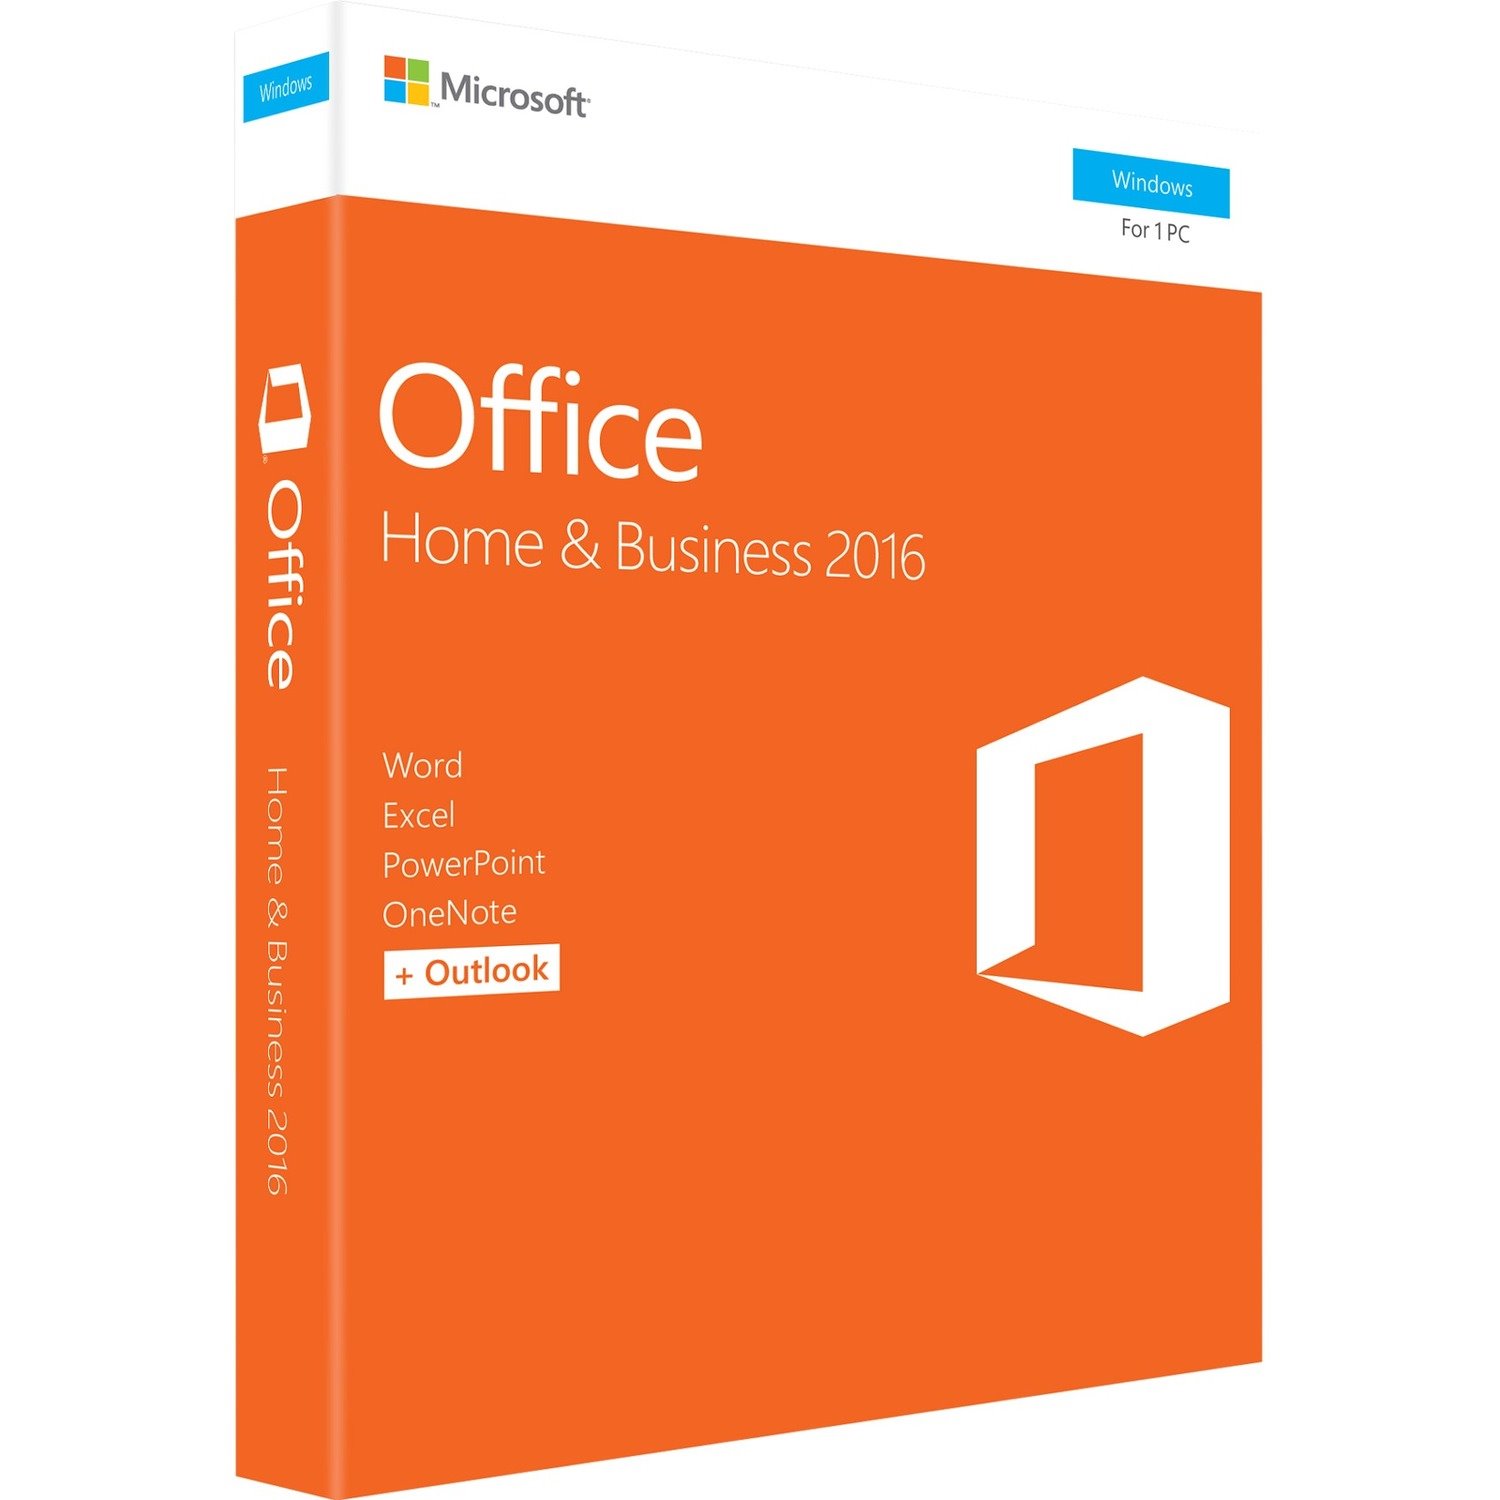 Microsoft Office 2016 Home & Business - 1 PC - Medialess - Word 2016, Excel 2016, PowerPoint 2016, OneNote 2016, and Outlook 2016